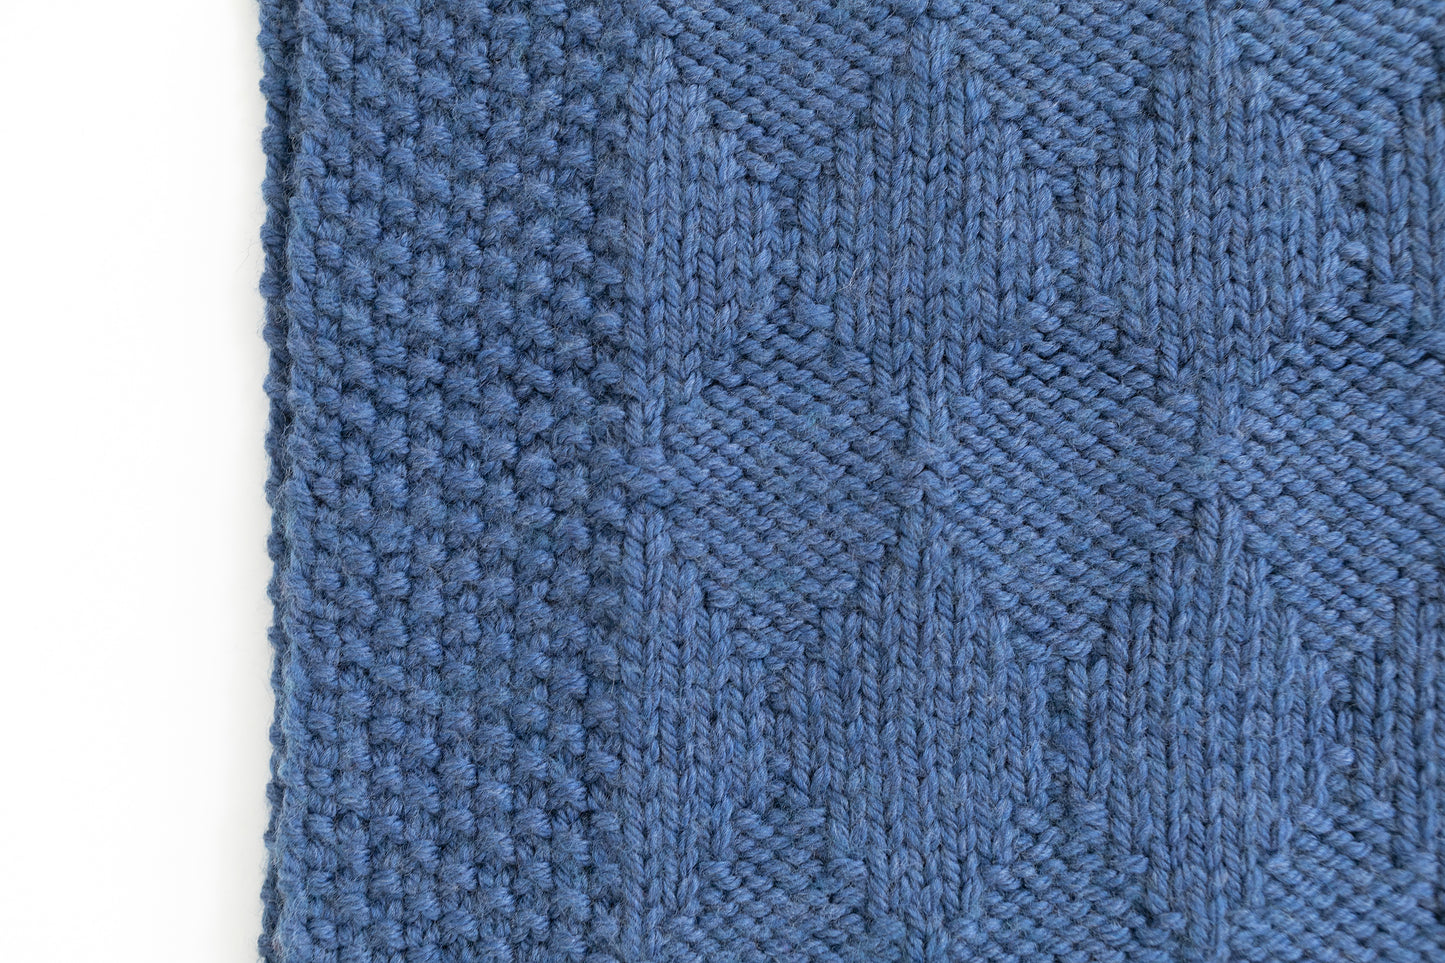 close up for Blue superwash wool hand-knitted baby blanket in Harlequin pattern